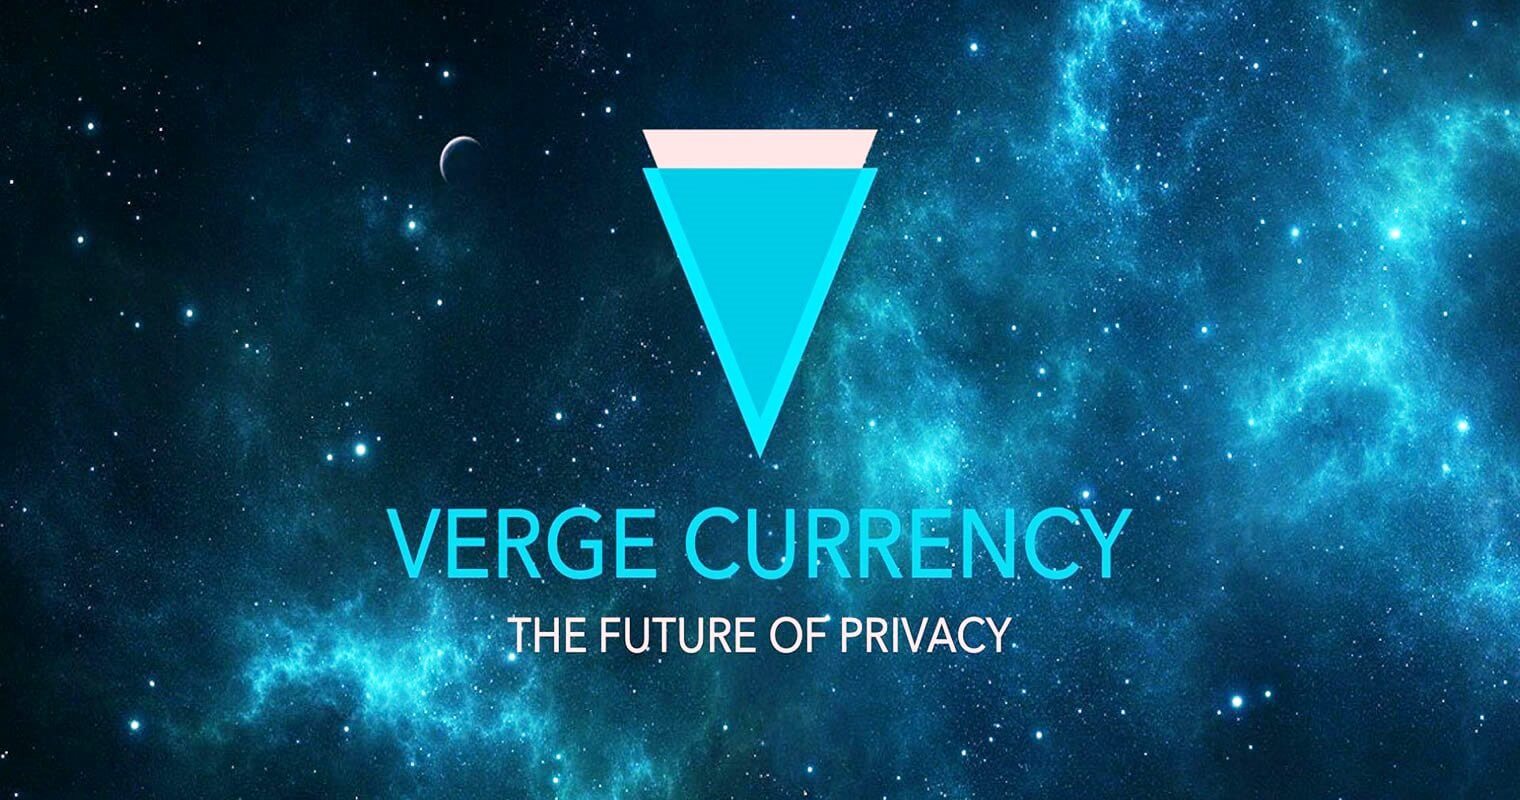 Verge cryptocurrency hacked and 35 million coins are mined ahead of their time